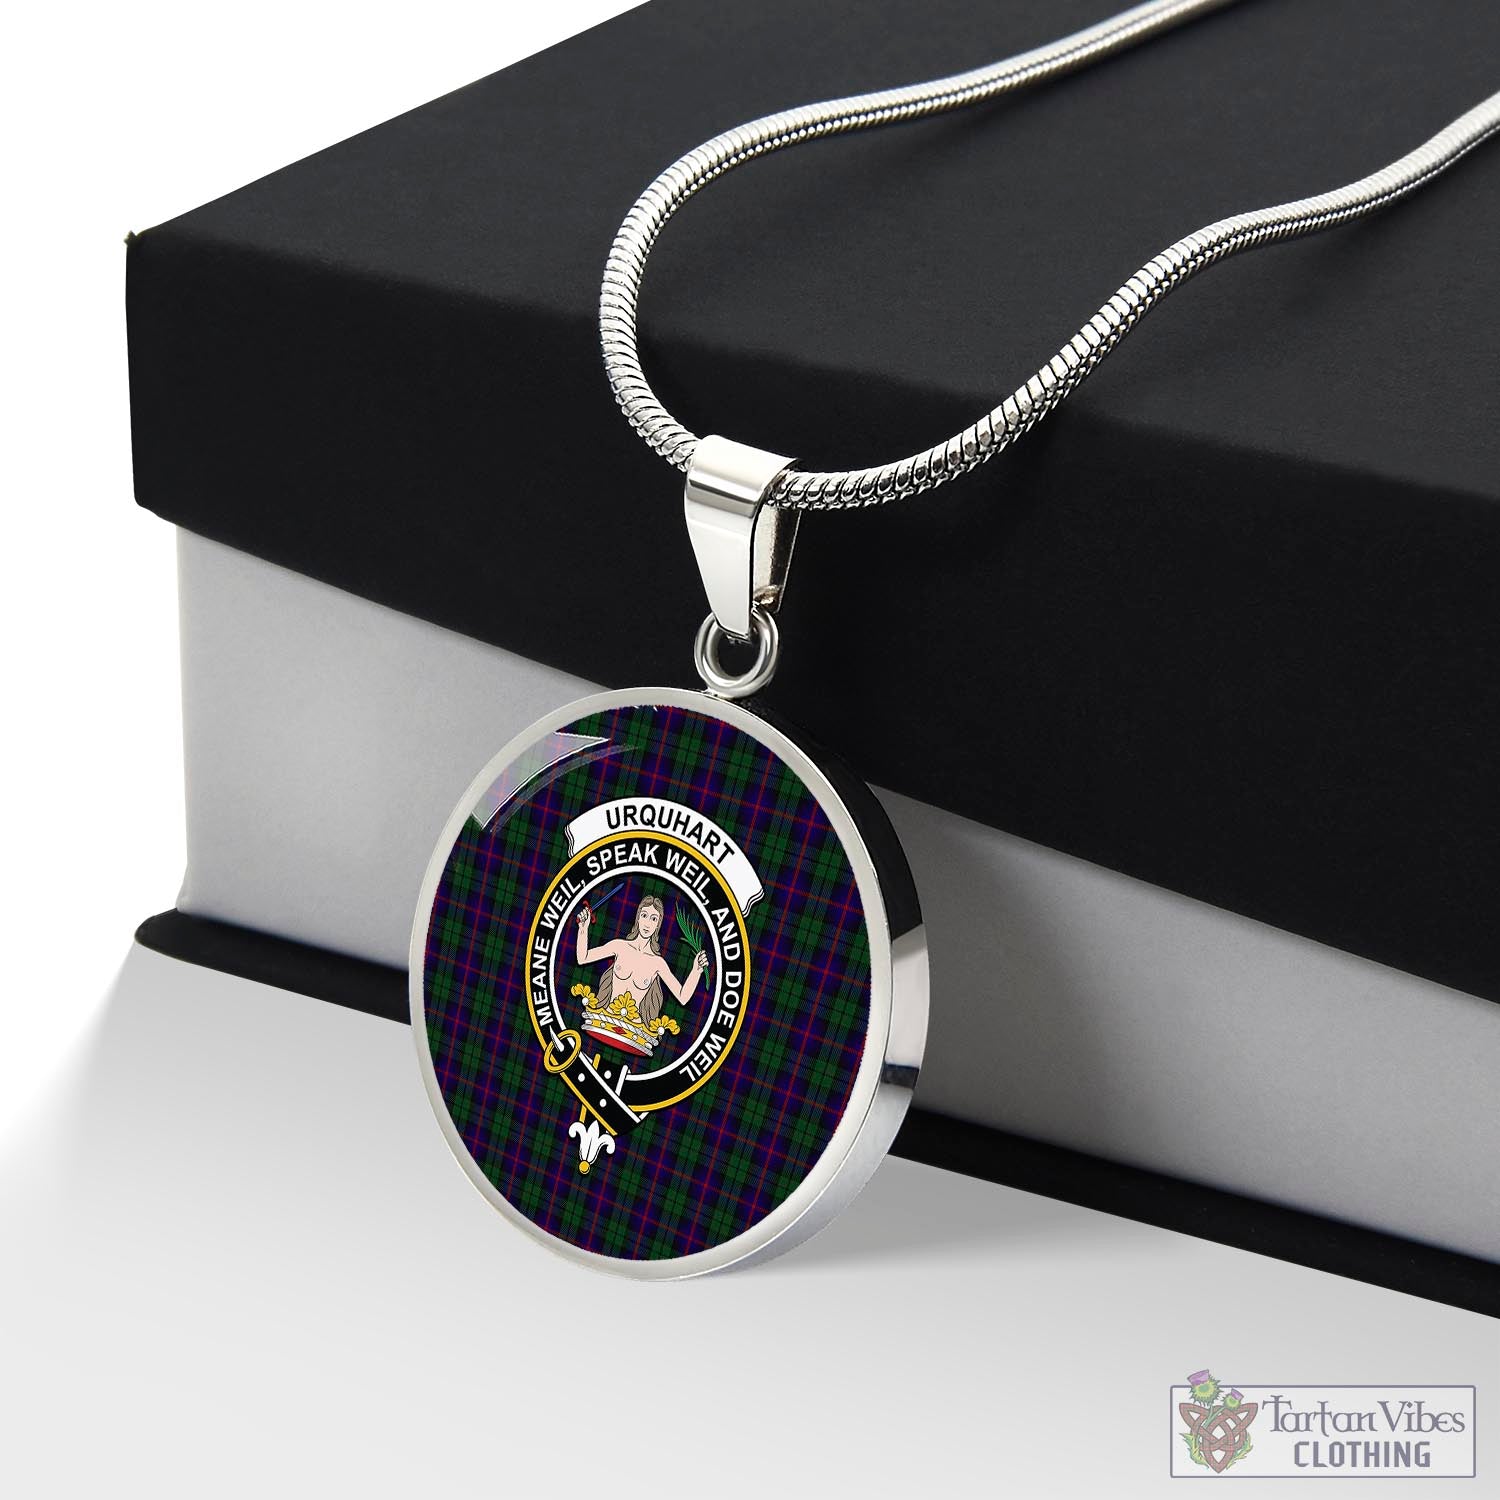 Tartan Vibes Clothing Urquhart Tartan Circle Necklace with Family Crest